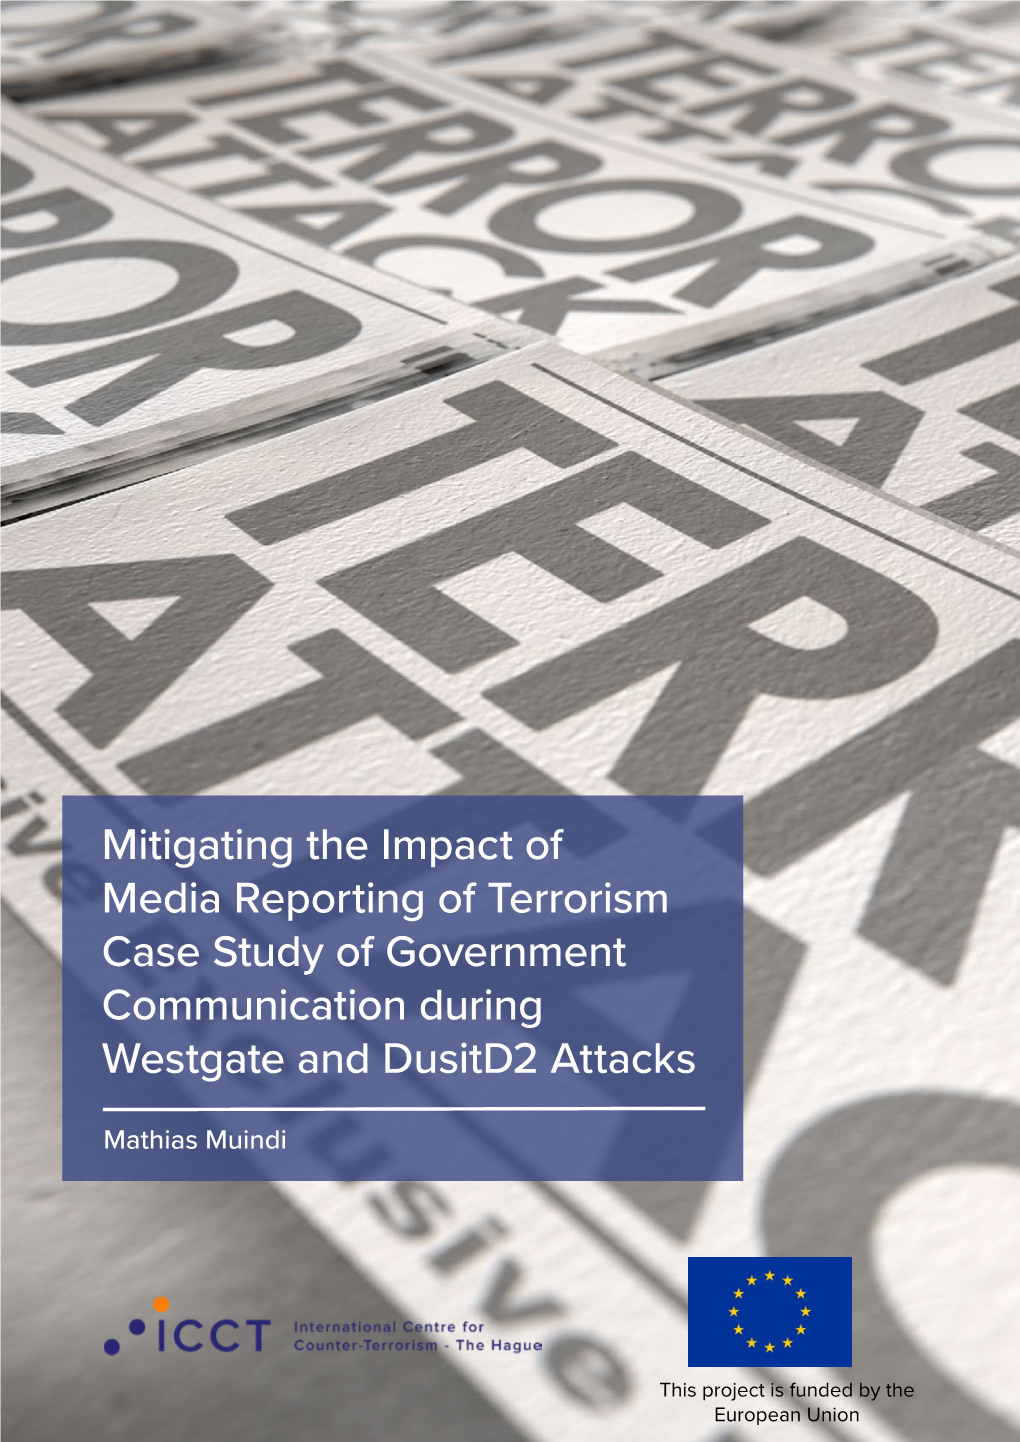 Mitigating the Impact of Media Reporting of Terrorism Case Study of Government Communication During Westgate and Dusitd2 Attacks